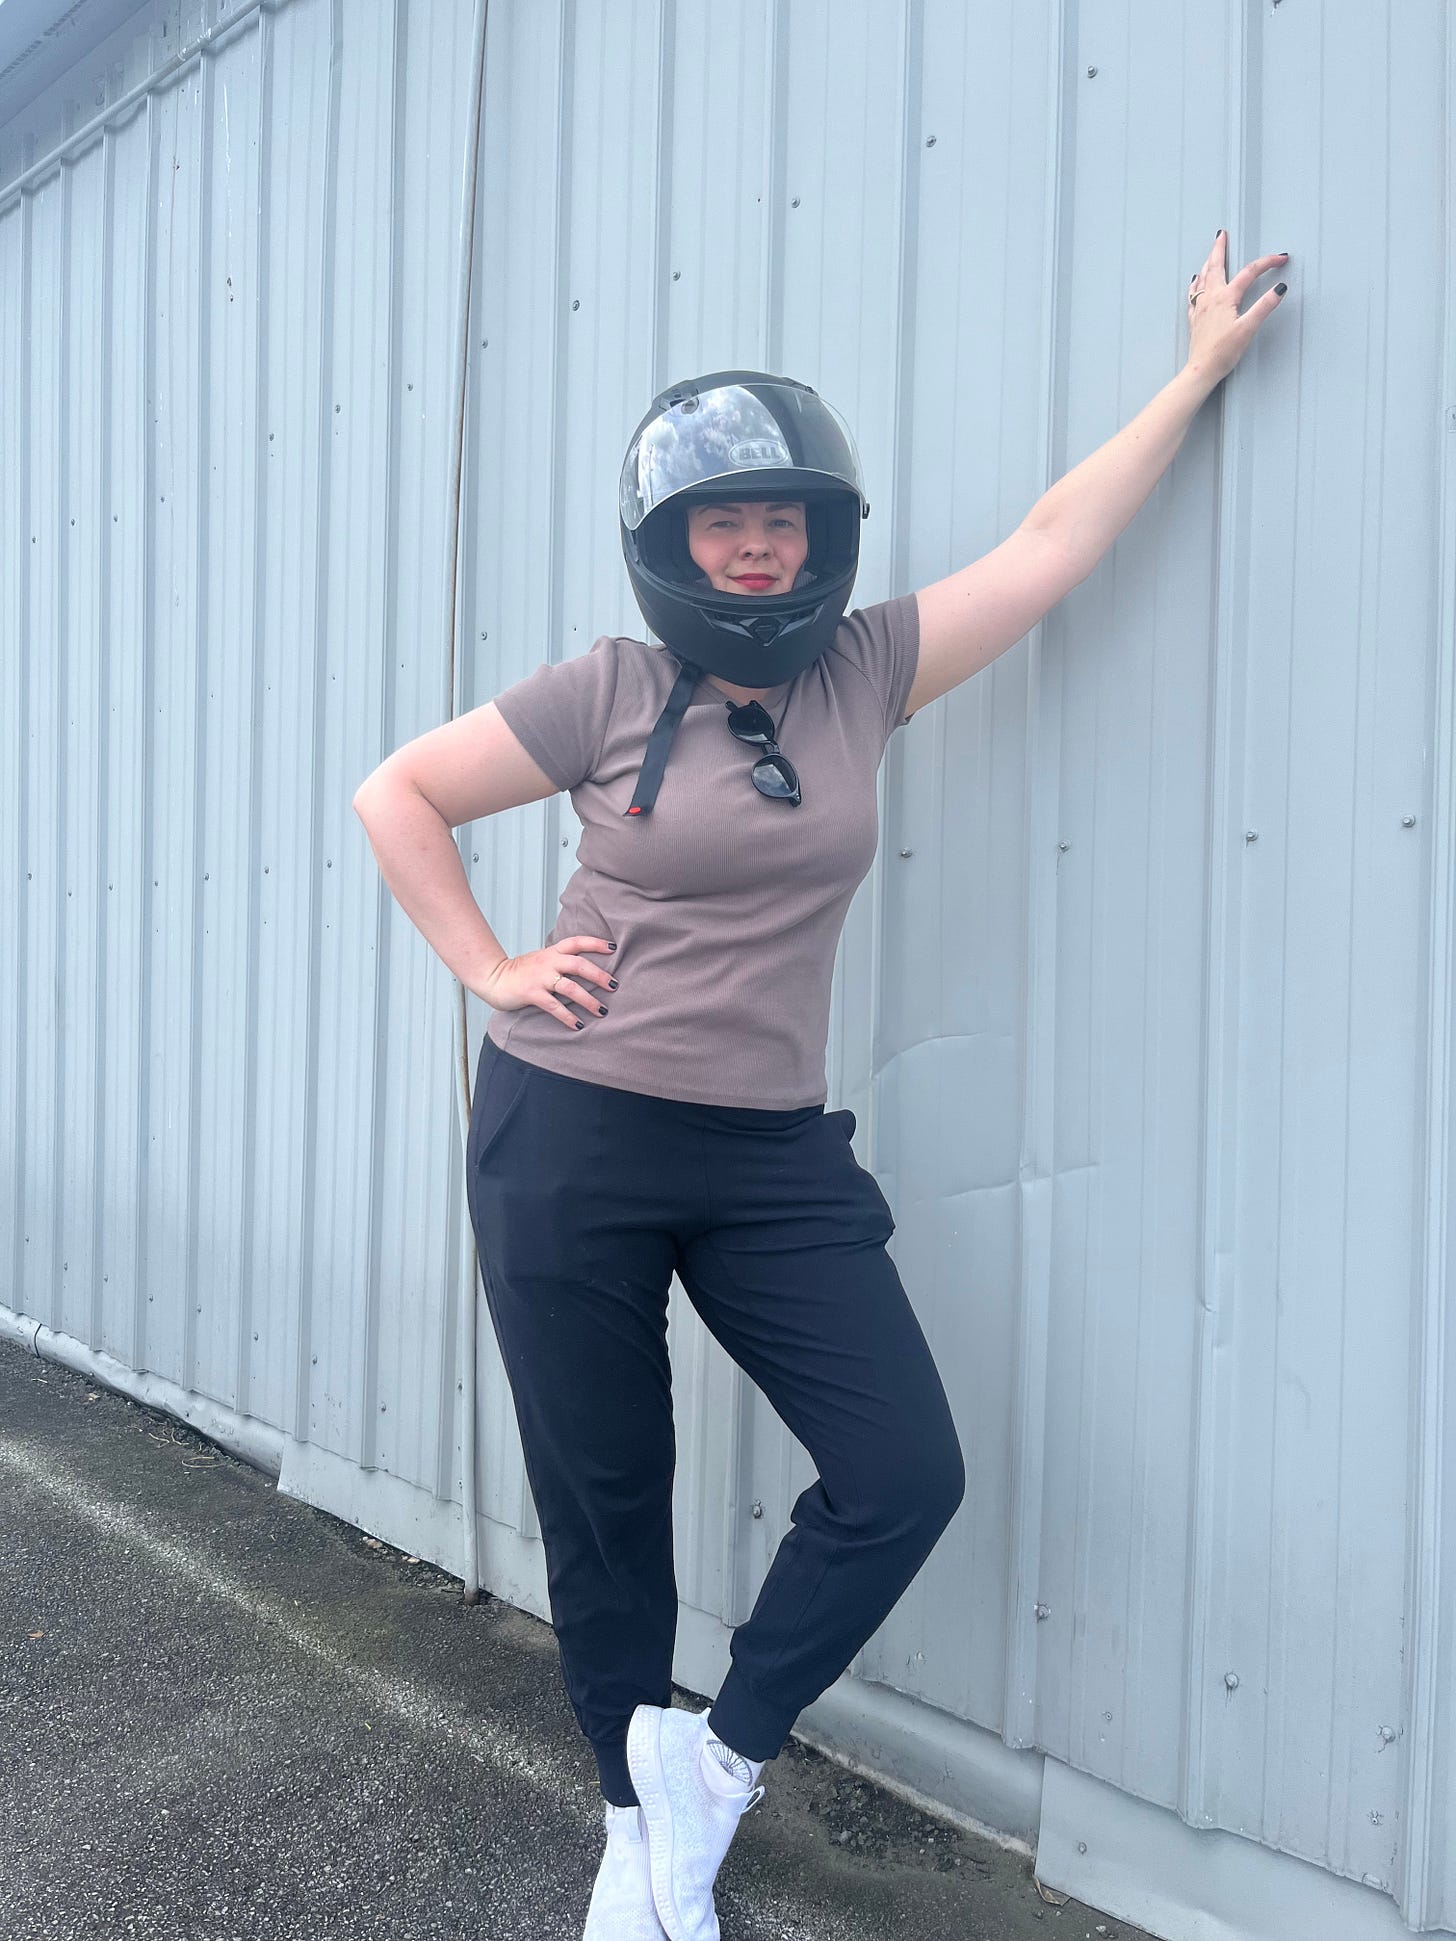 Amber has one hand on her hip and the other propping herself up against a building. She is wearing her motorcycle helmet, looking at the camera, smiling.